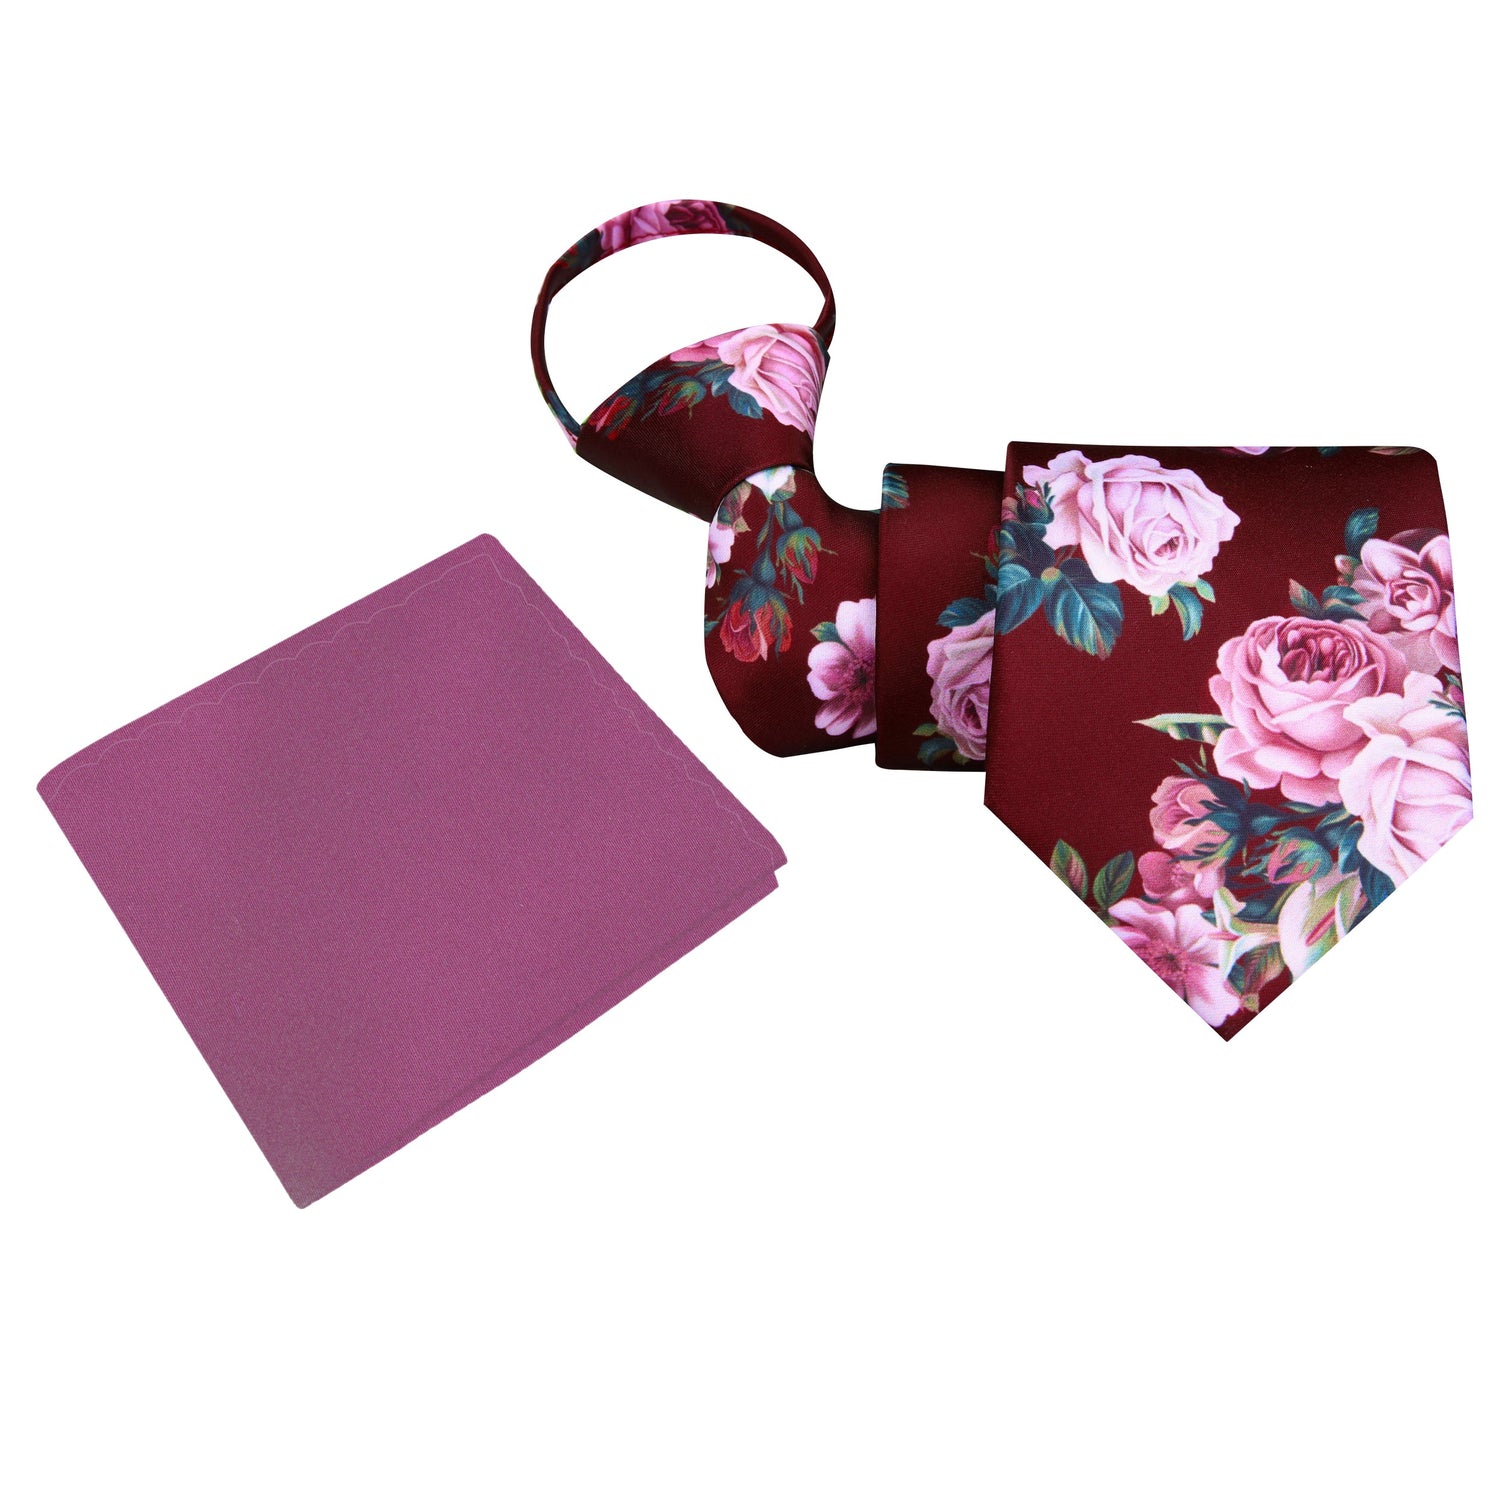 Zipper: Deep Red Wine Vase of Flowers Tie and Accenting PocketSquare